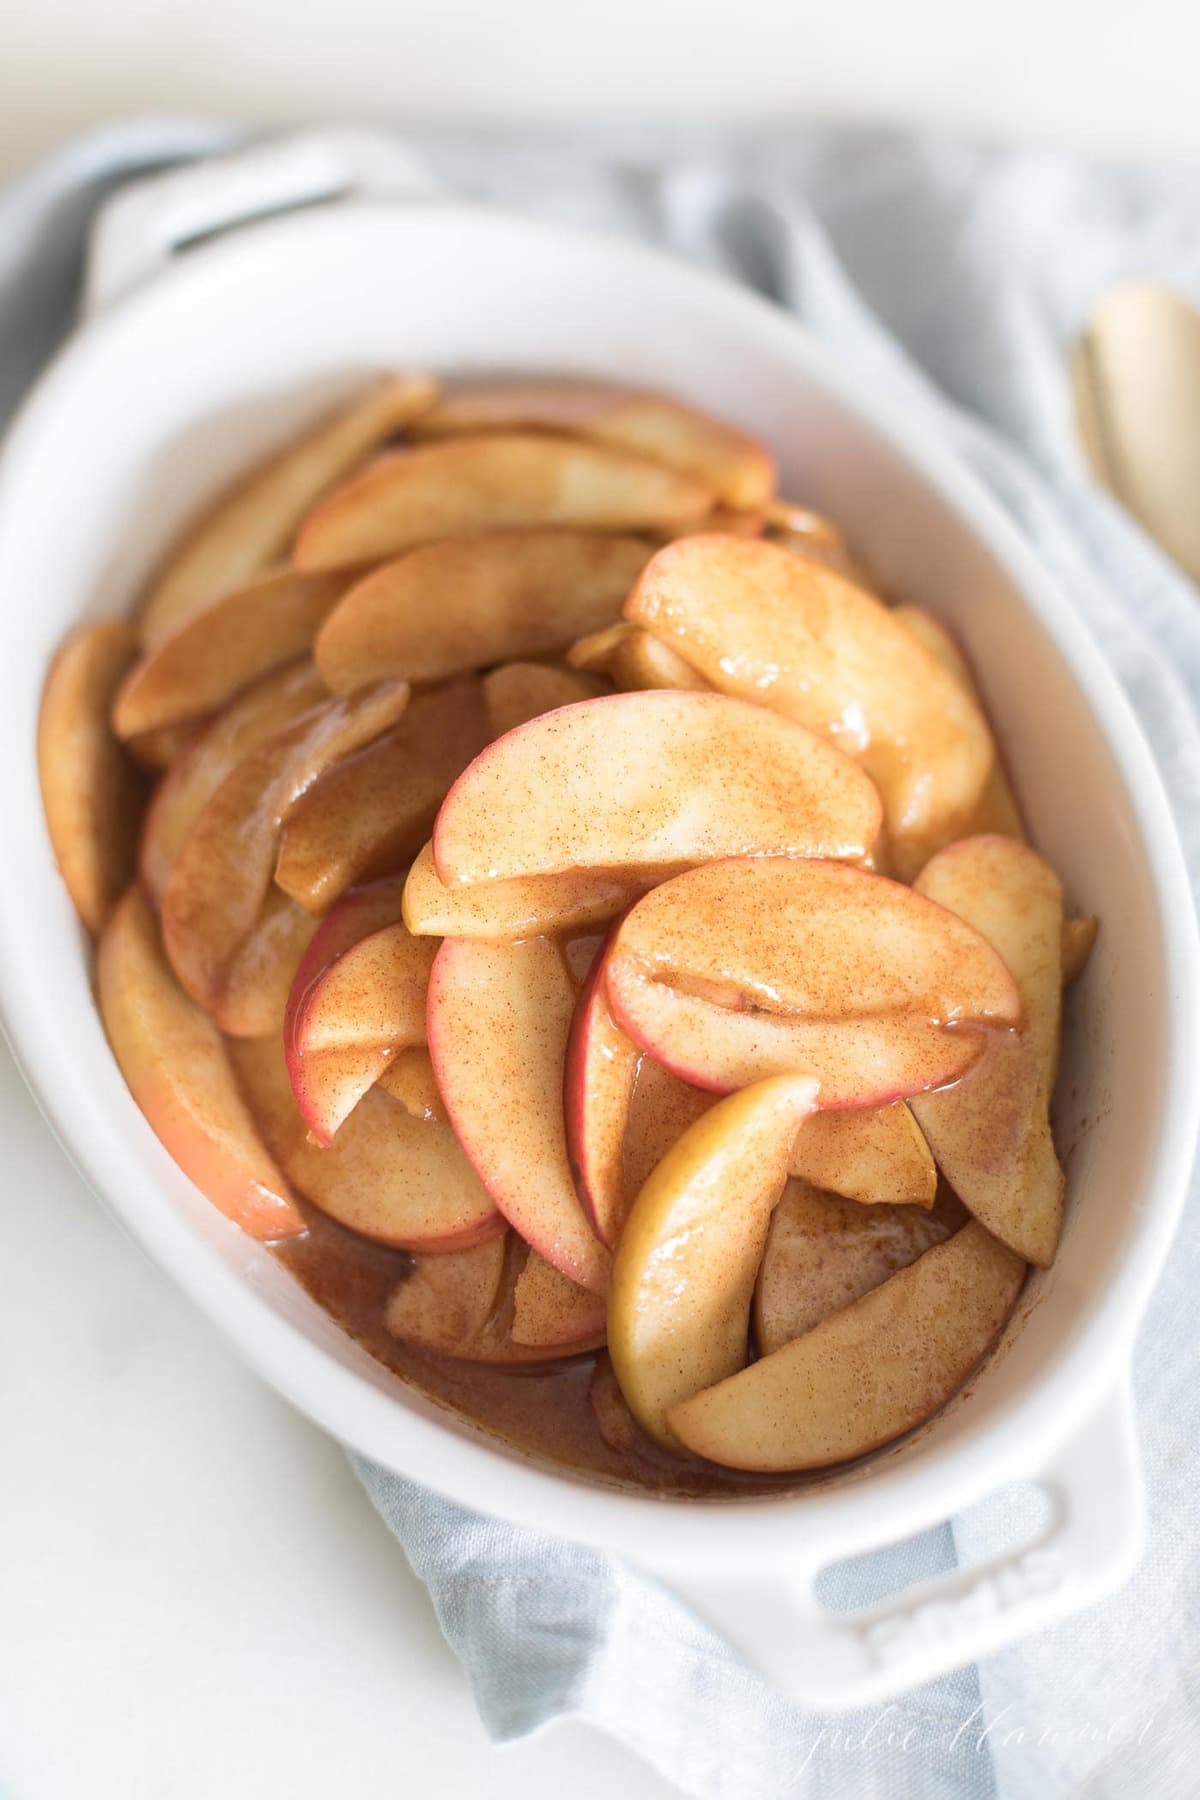 baked apples in a white baking dish